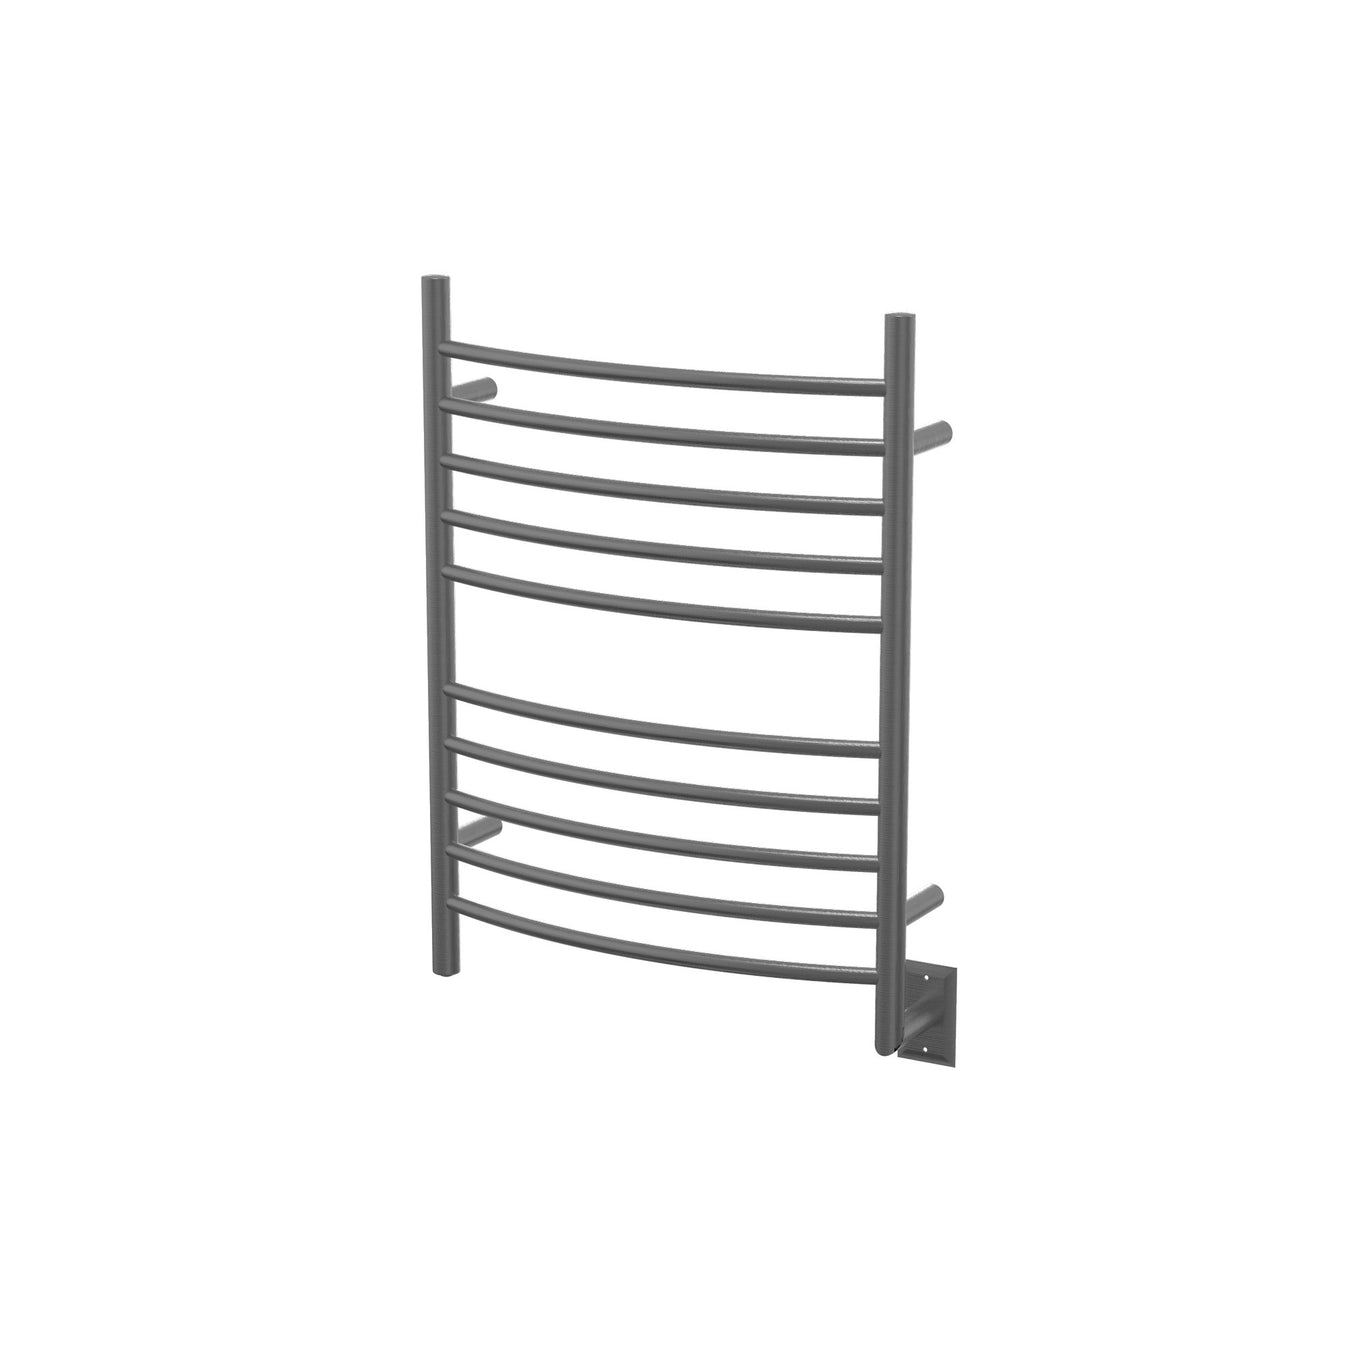 Amba Products Radiant Collection Hardwired Curved Towel Warmers